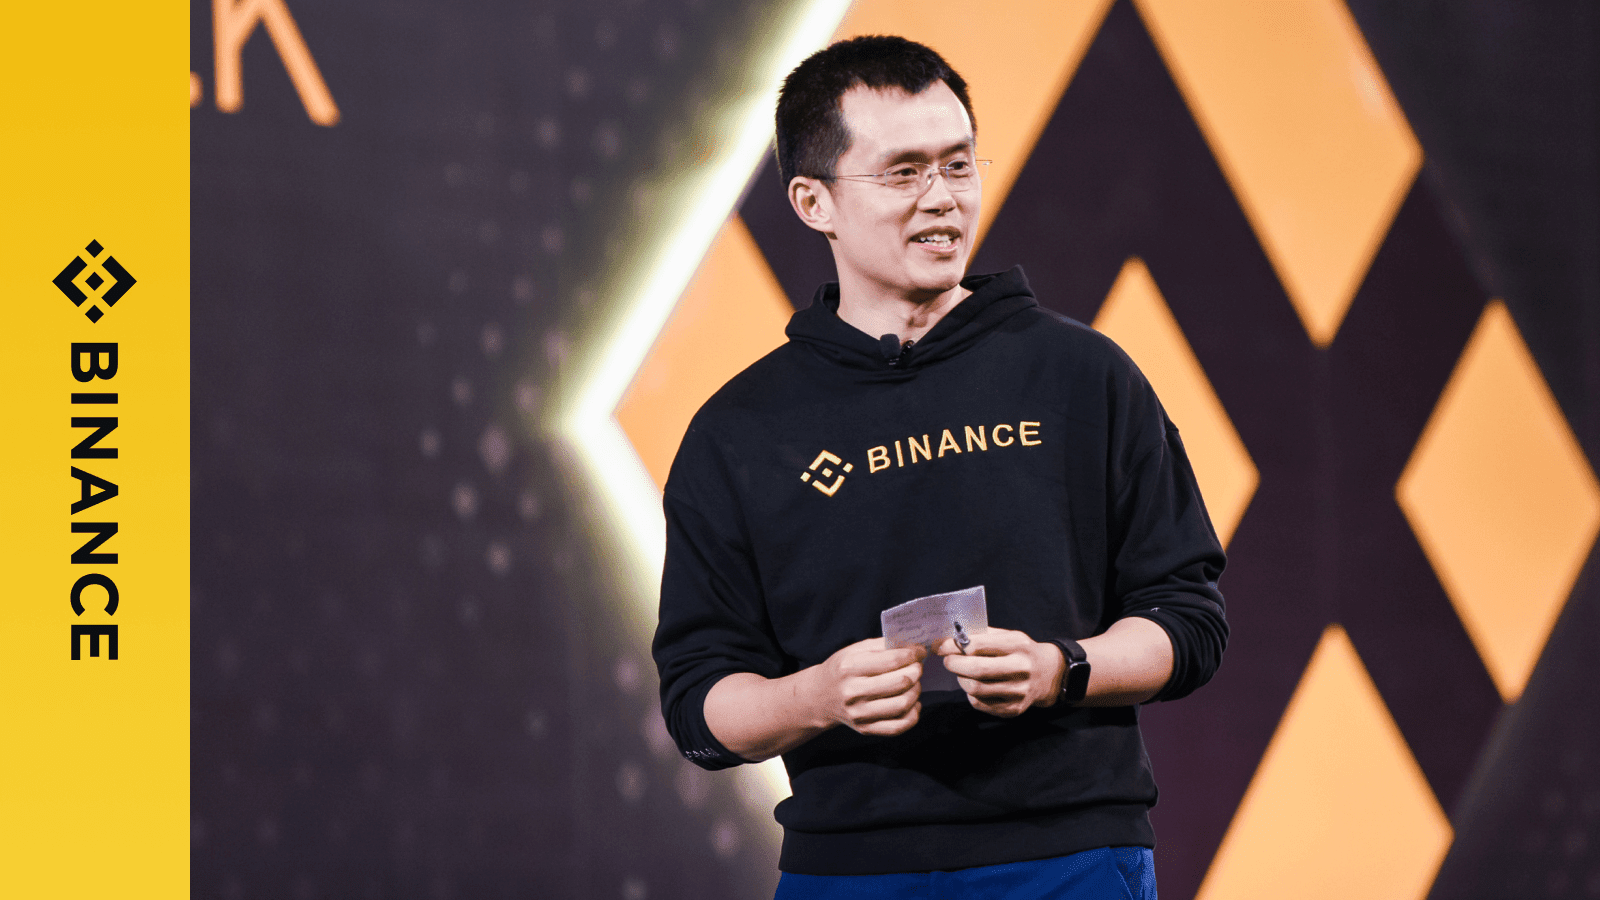 Binance CEO could join the Twitter board if Musk asks